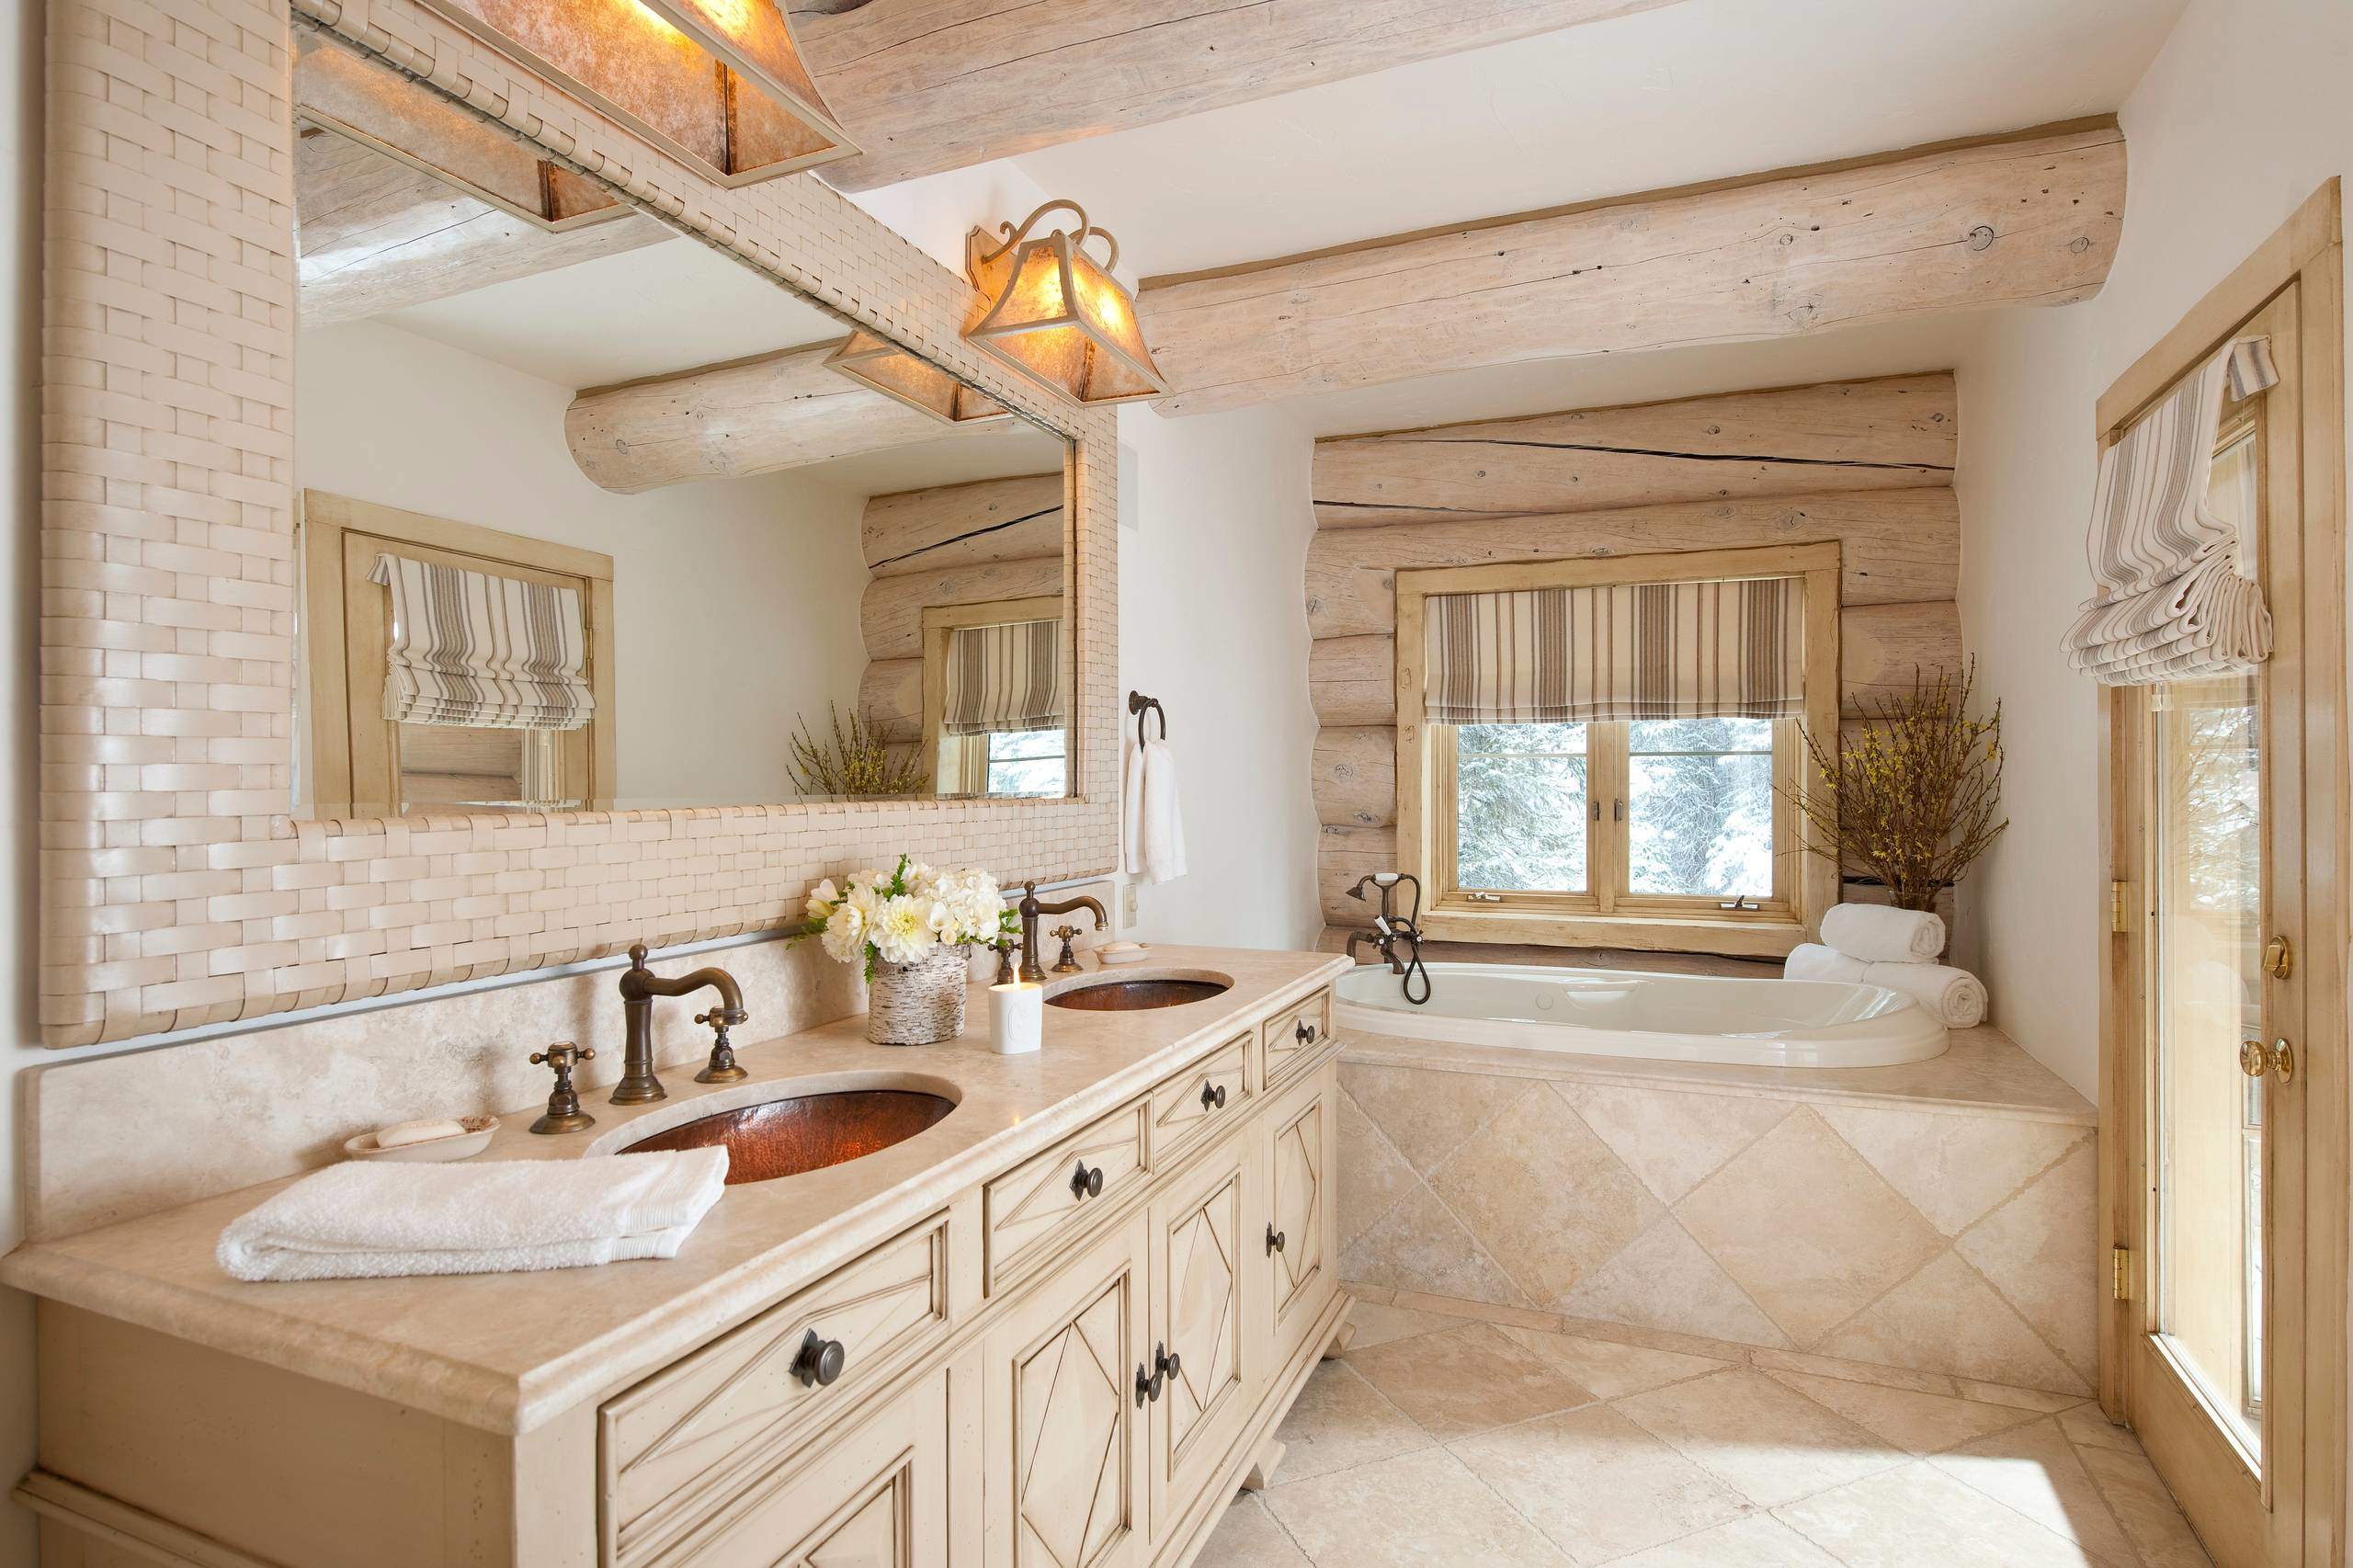 Plastered walls bring rustic magic to the charming bathroom [Design:  Cabinet Concepts by Design